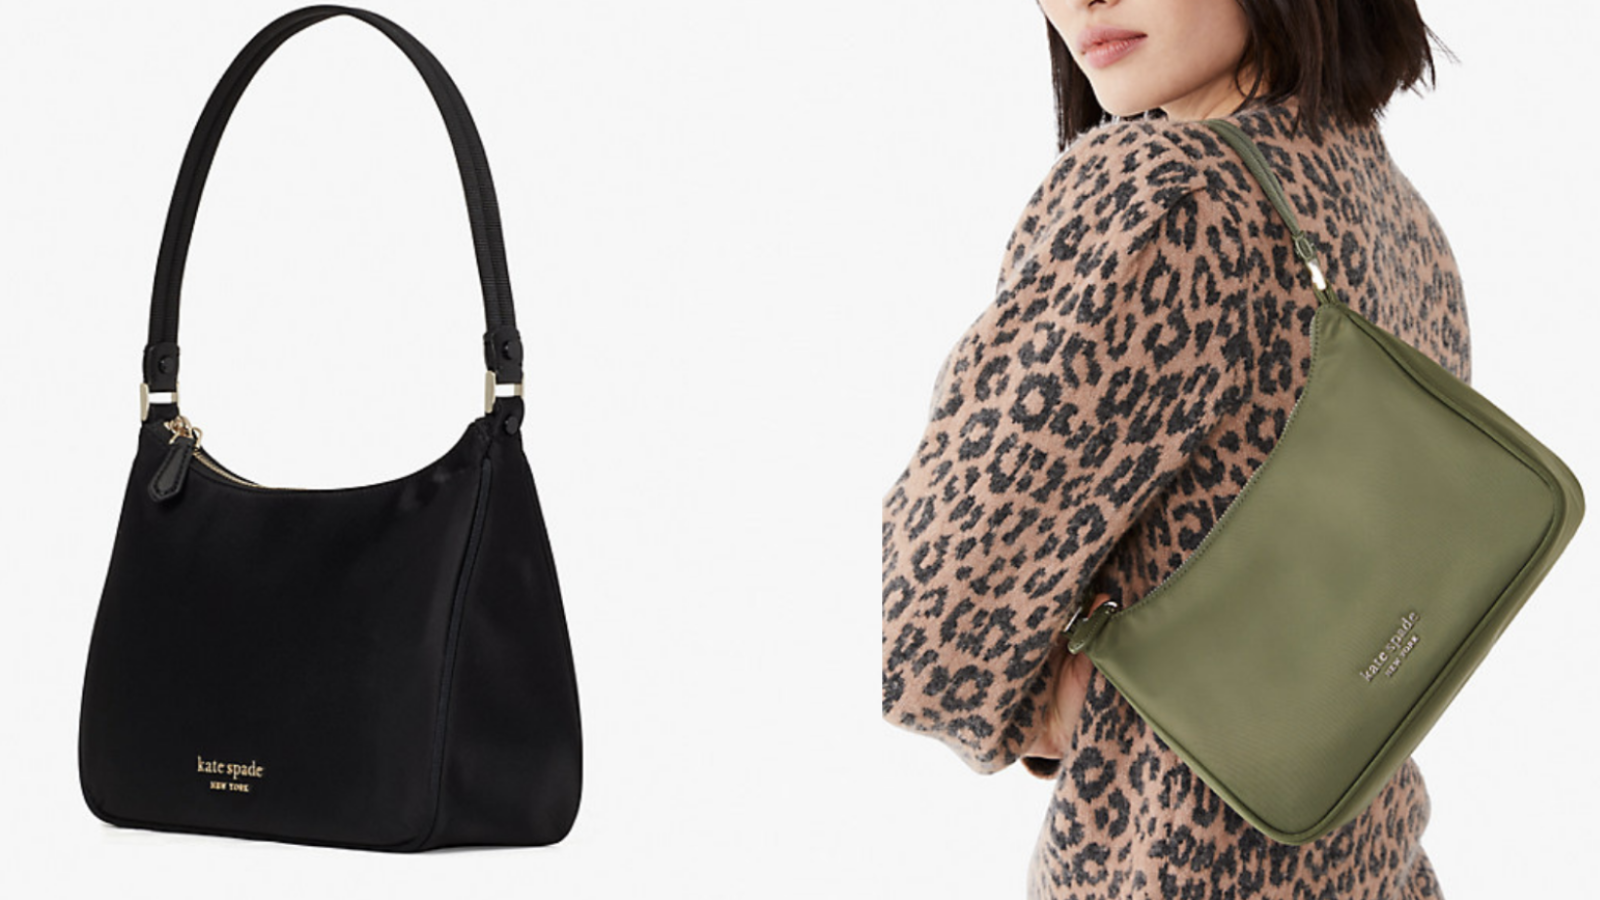 Kate Spade bags for fall 2021: Totes, crossbody bags, satchels, and more